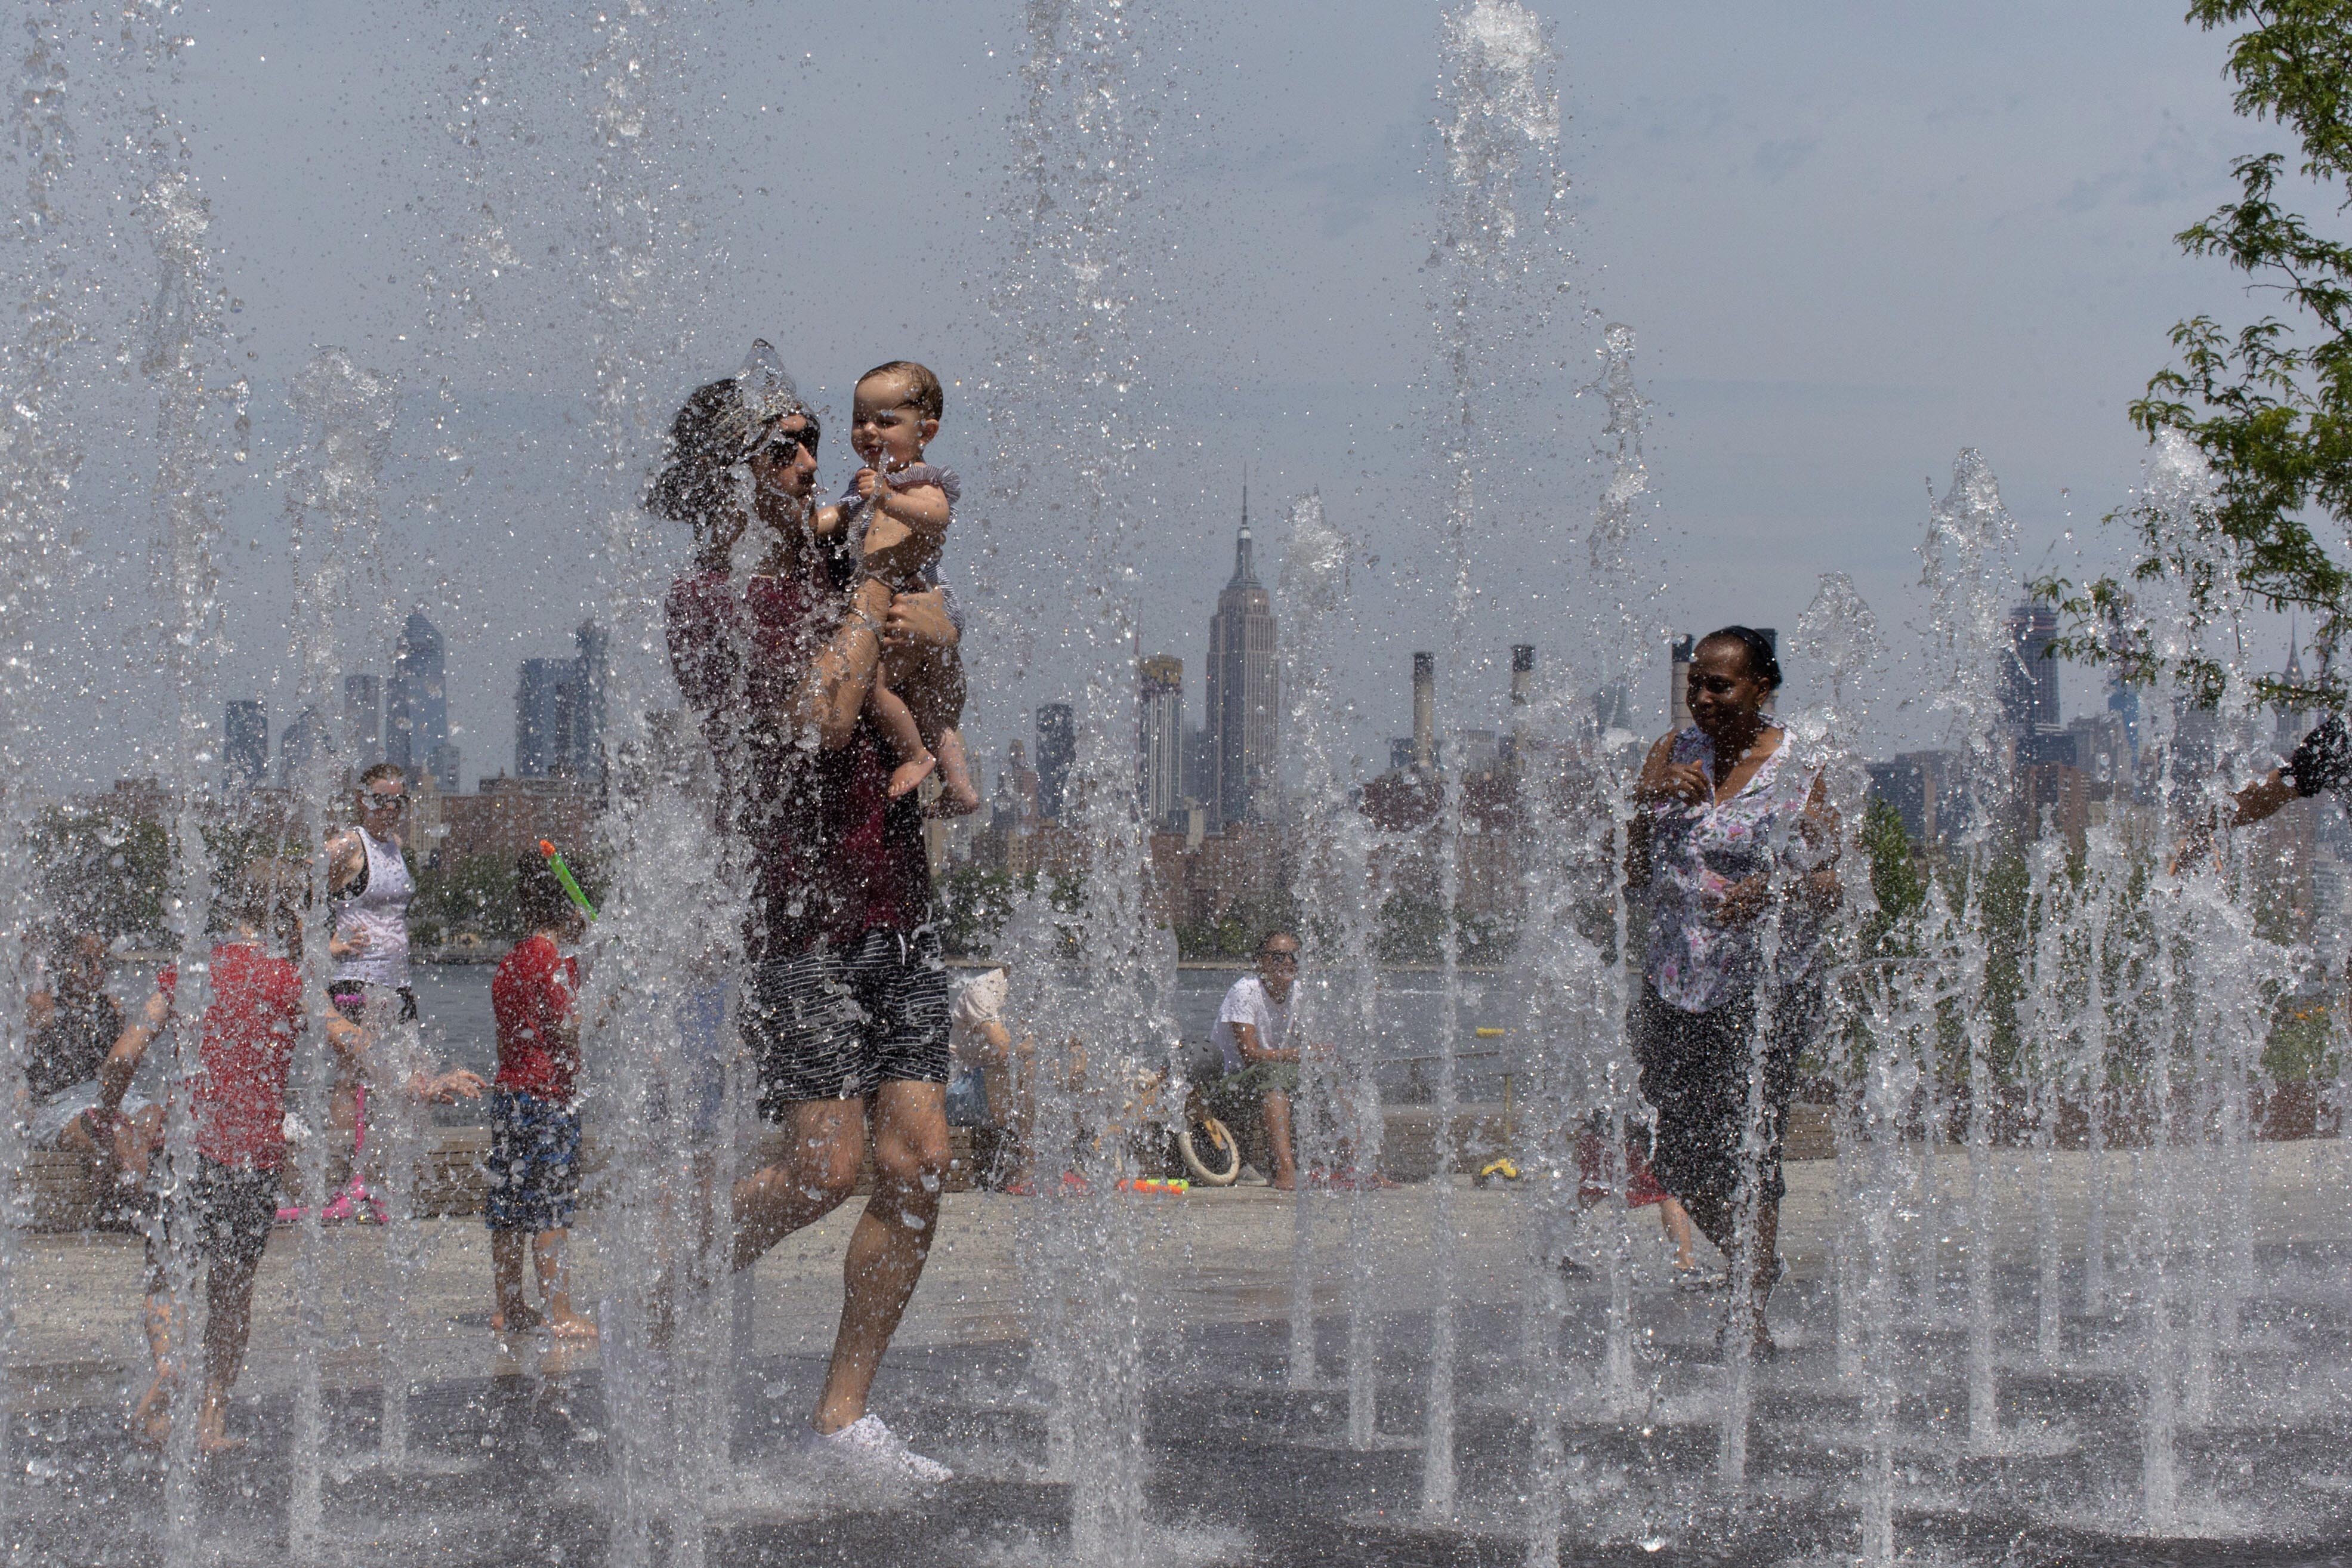 People enjoy the day playing in a water fountain as the Empire State Building is seen from Williamsburg section of Brooklyn on Saturday, July 20, 2019 in New York. Photo: AP